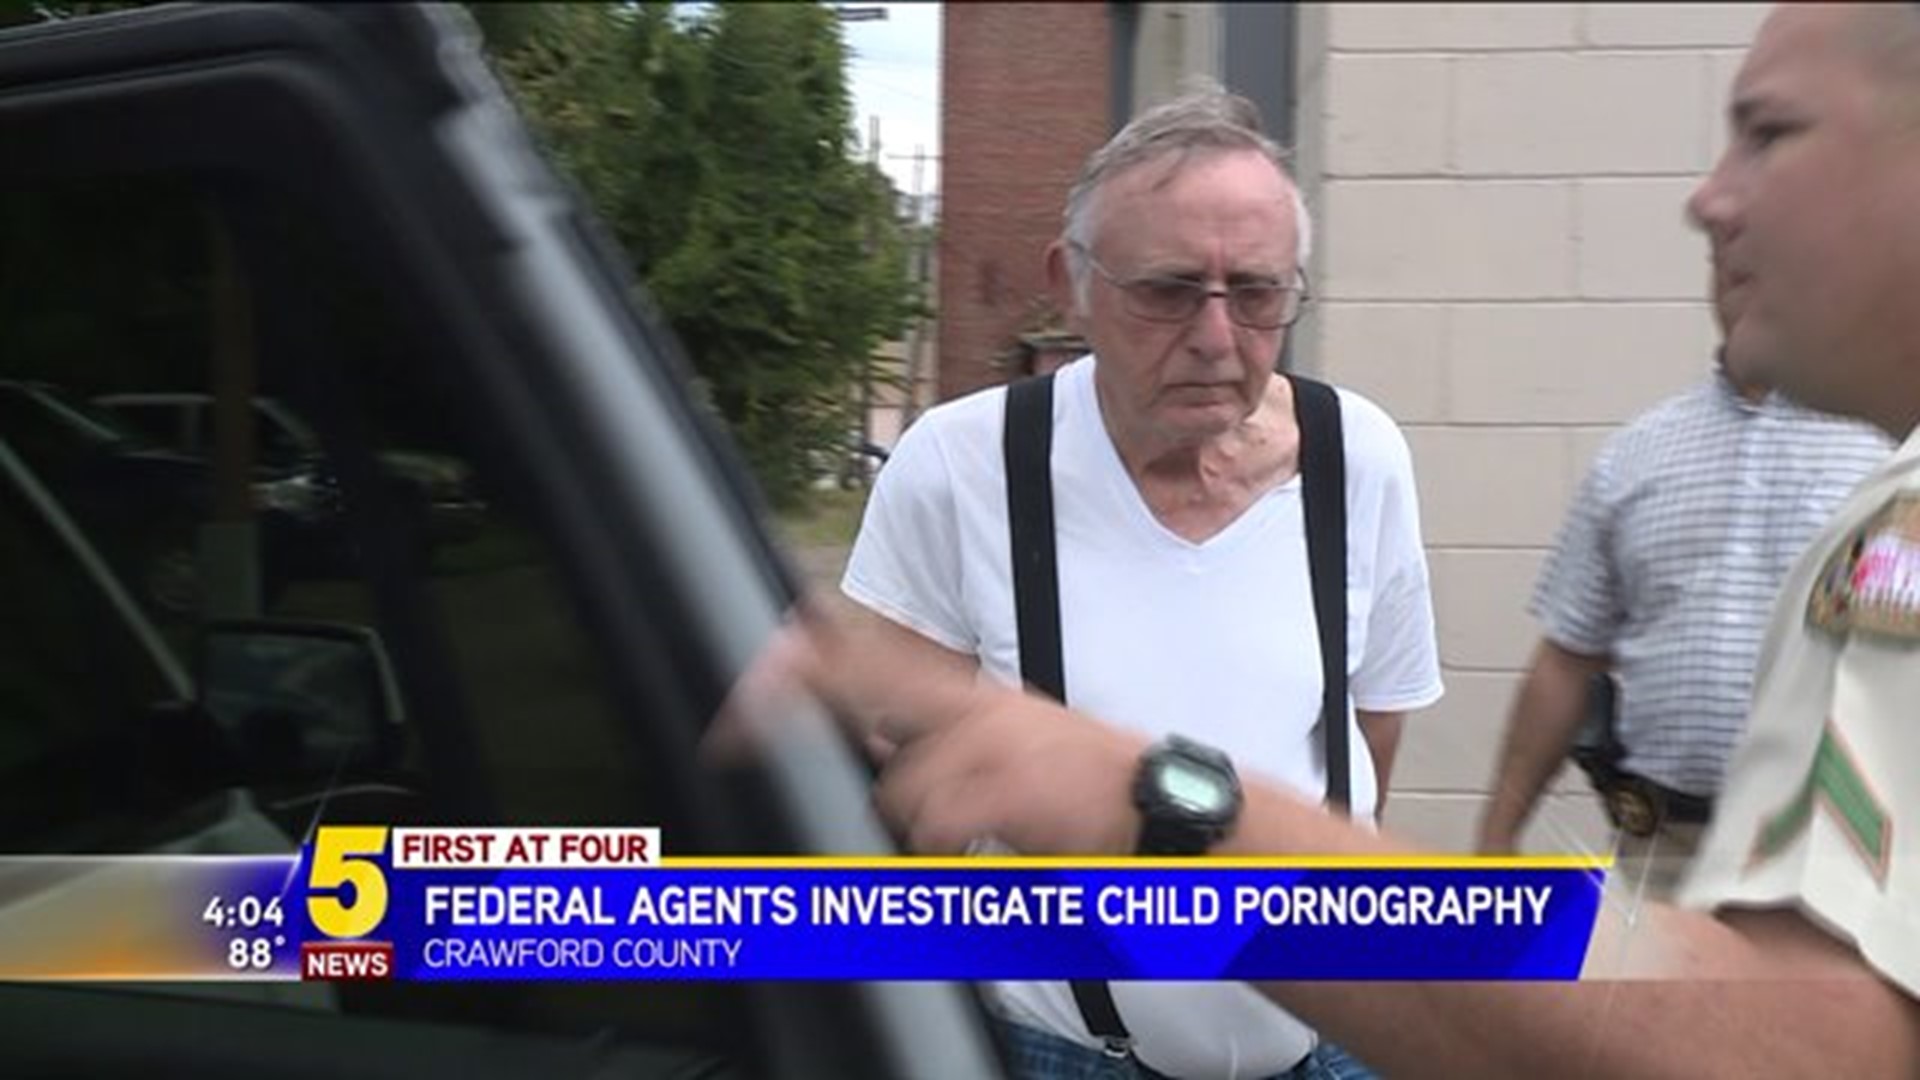 Man Arrested On Child Pornography Charges